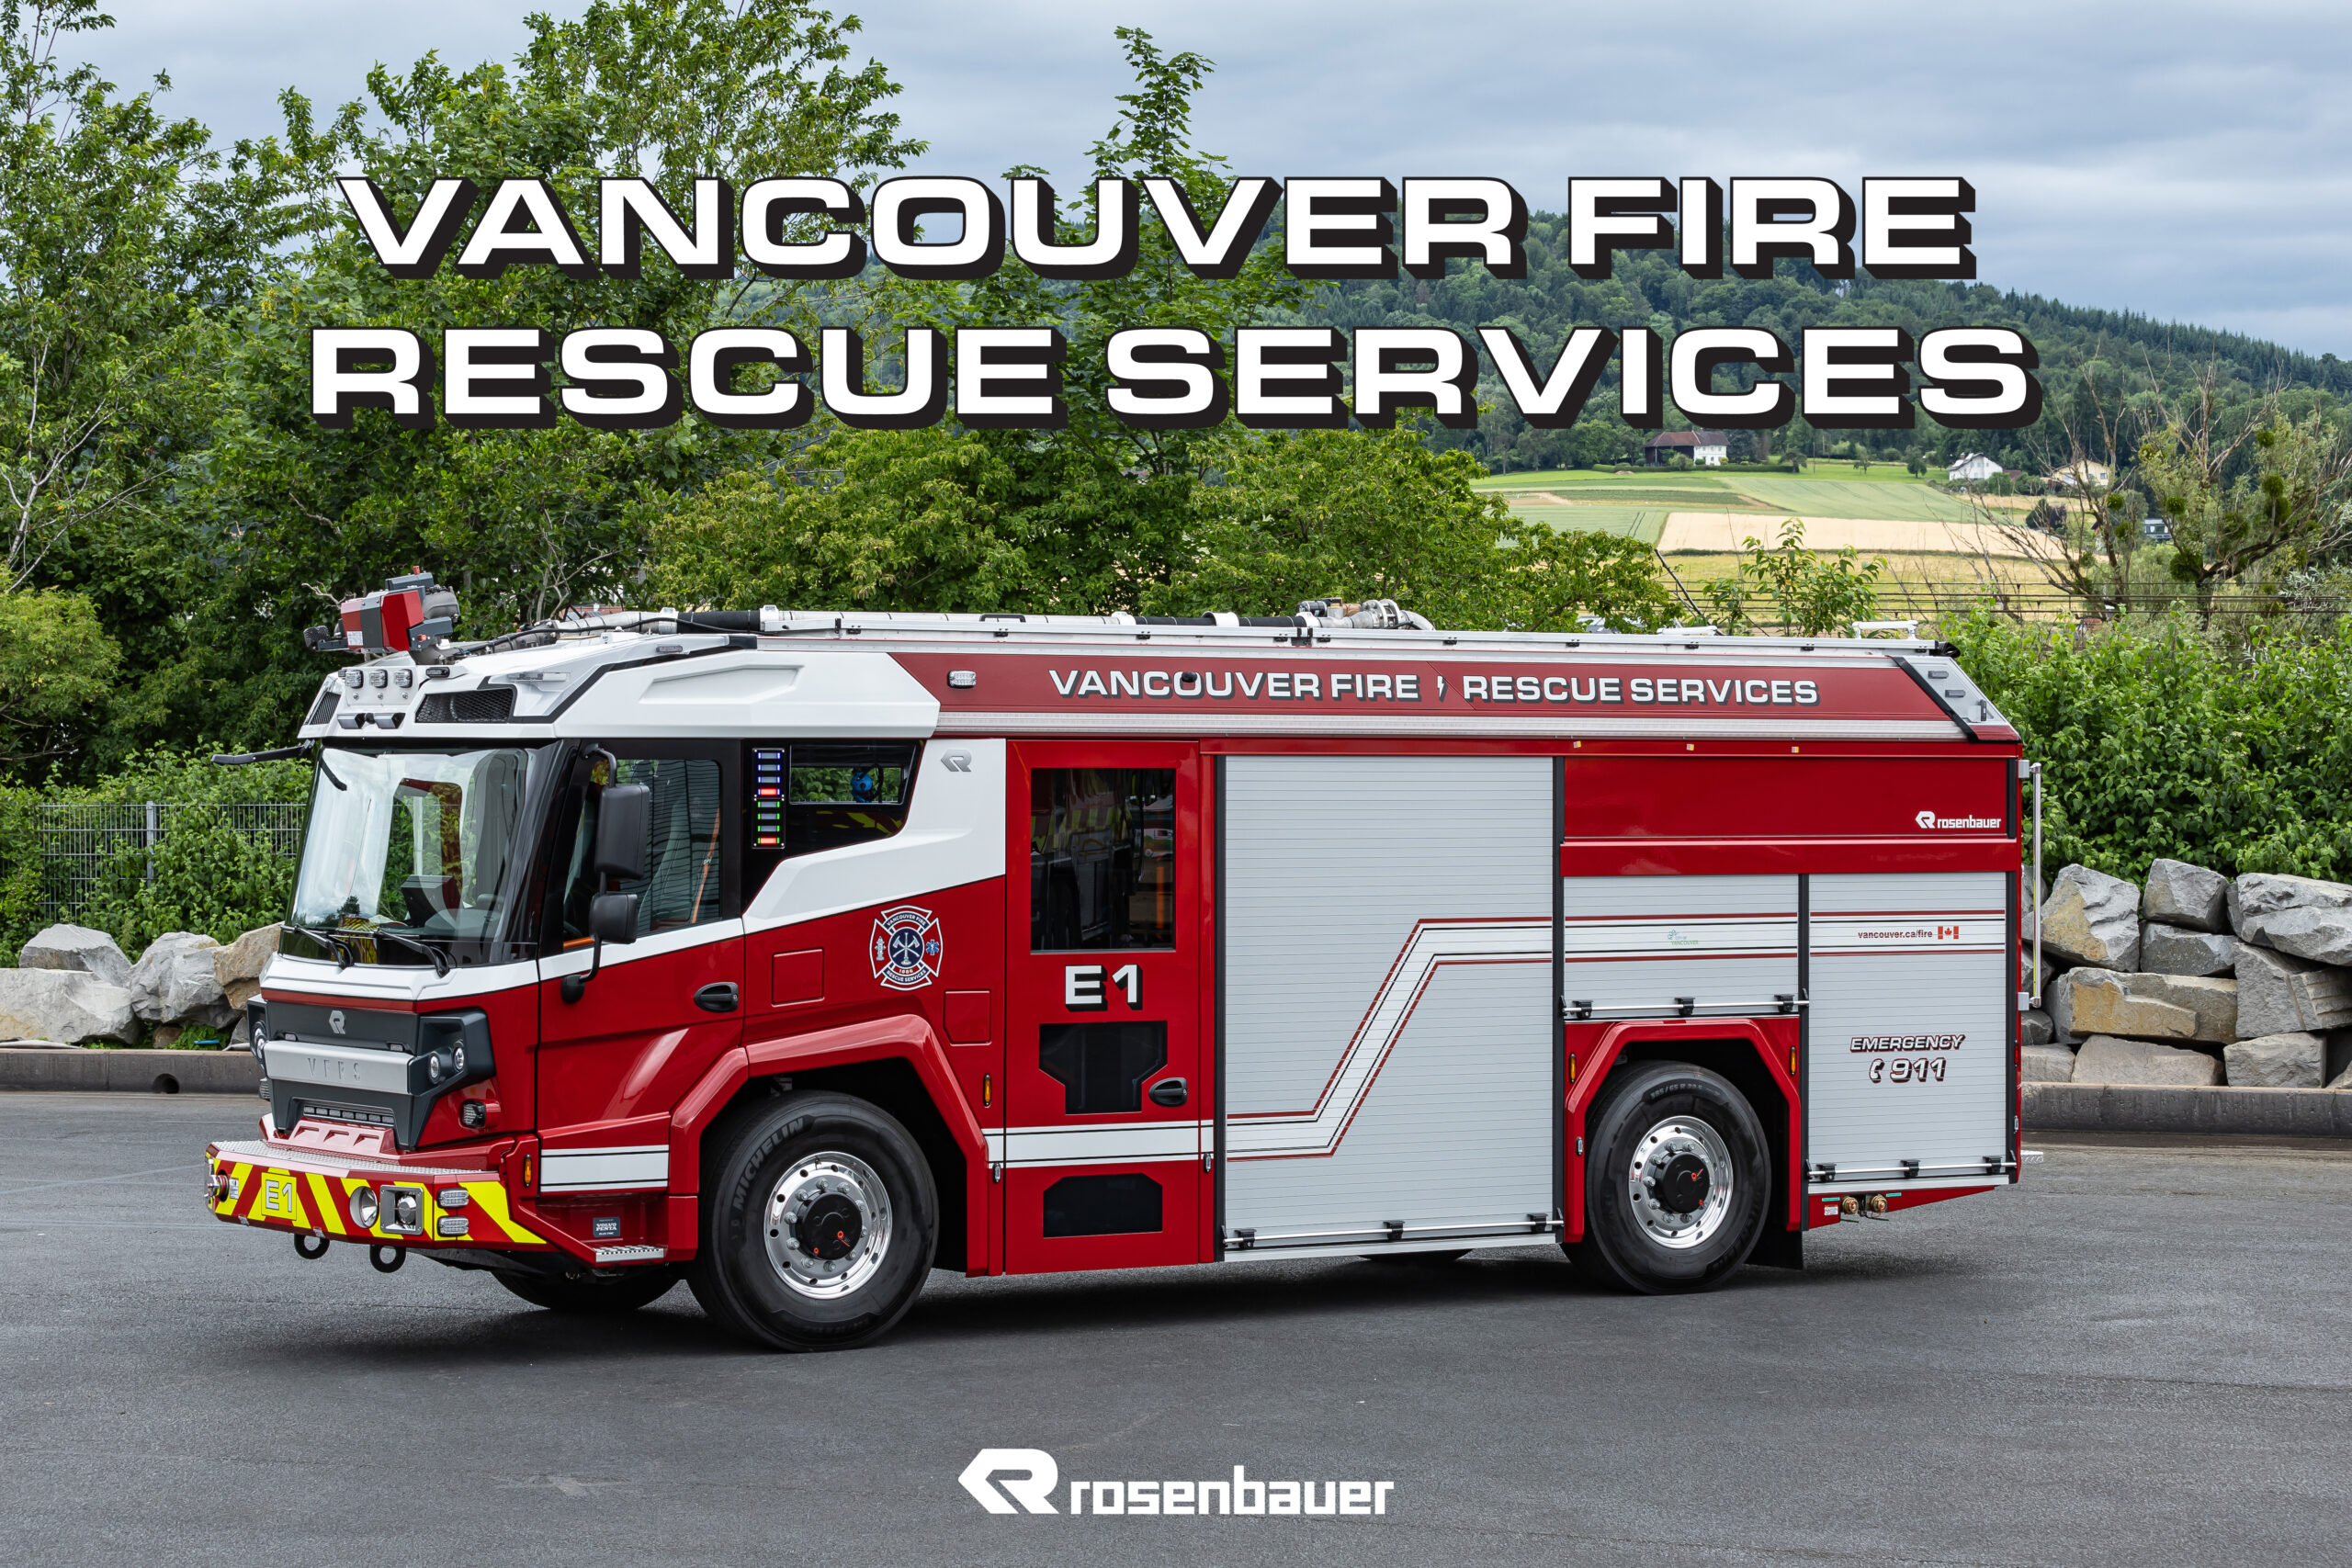 Vancouver Fire's Cutting-Edge RTX Now in Service!